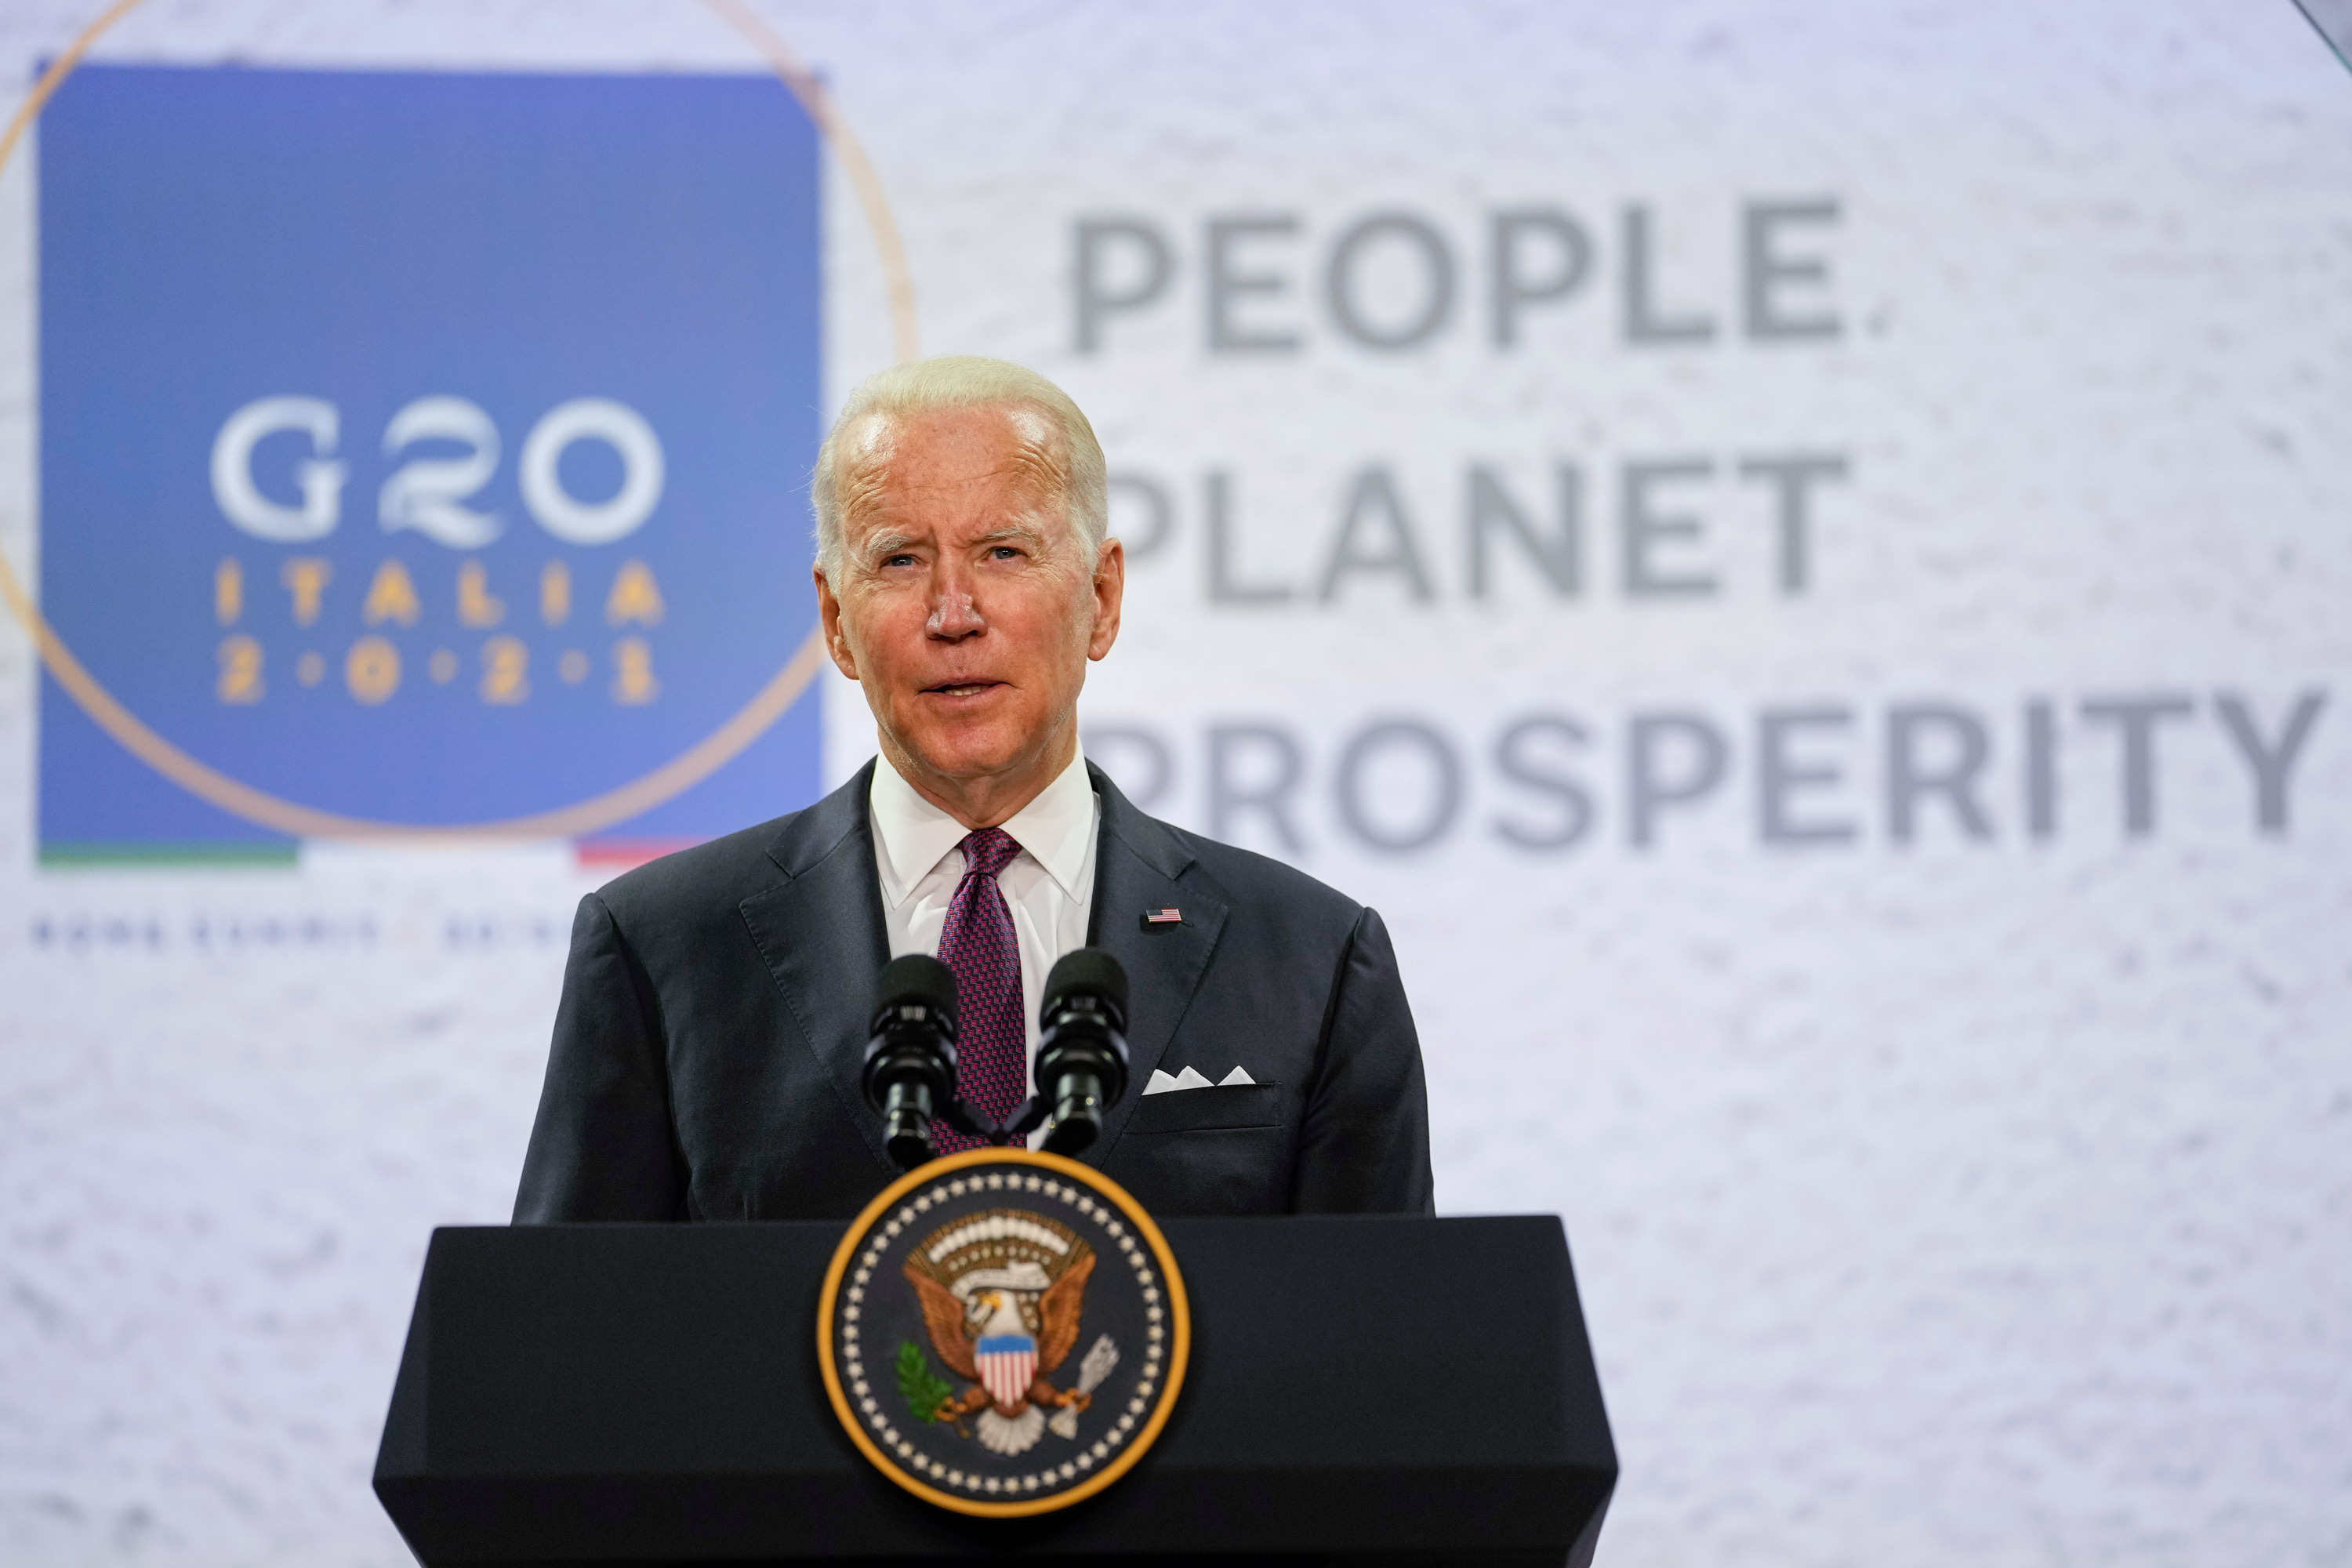 President Biden speaks during a press conference at the La Nuvola conference center for the G20 summit in Rome on October 31.